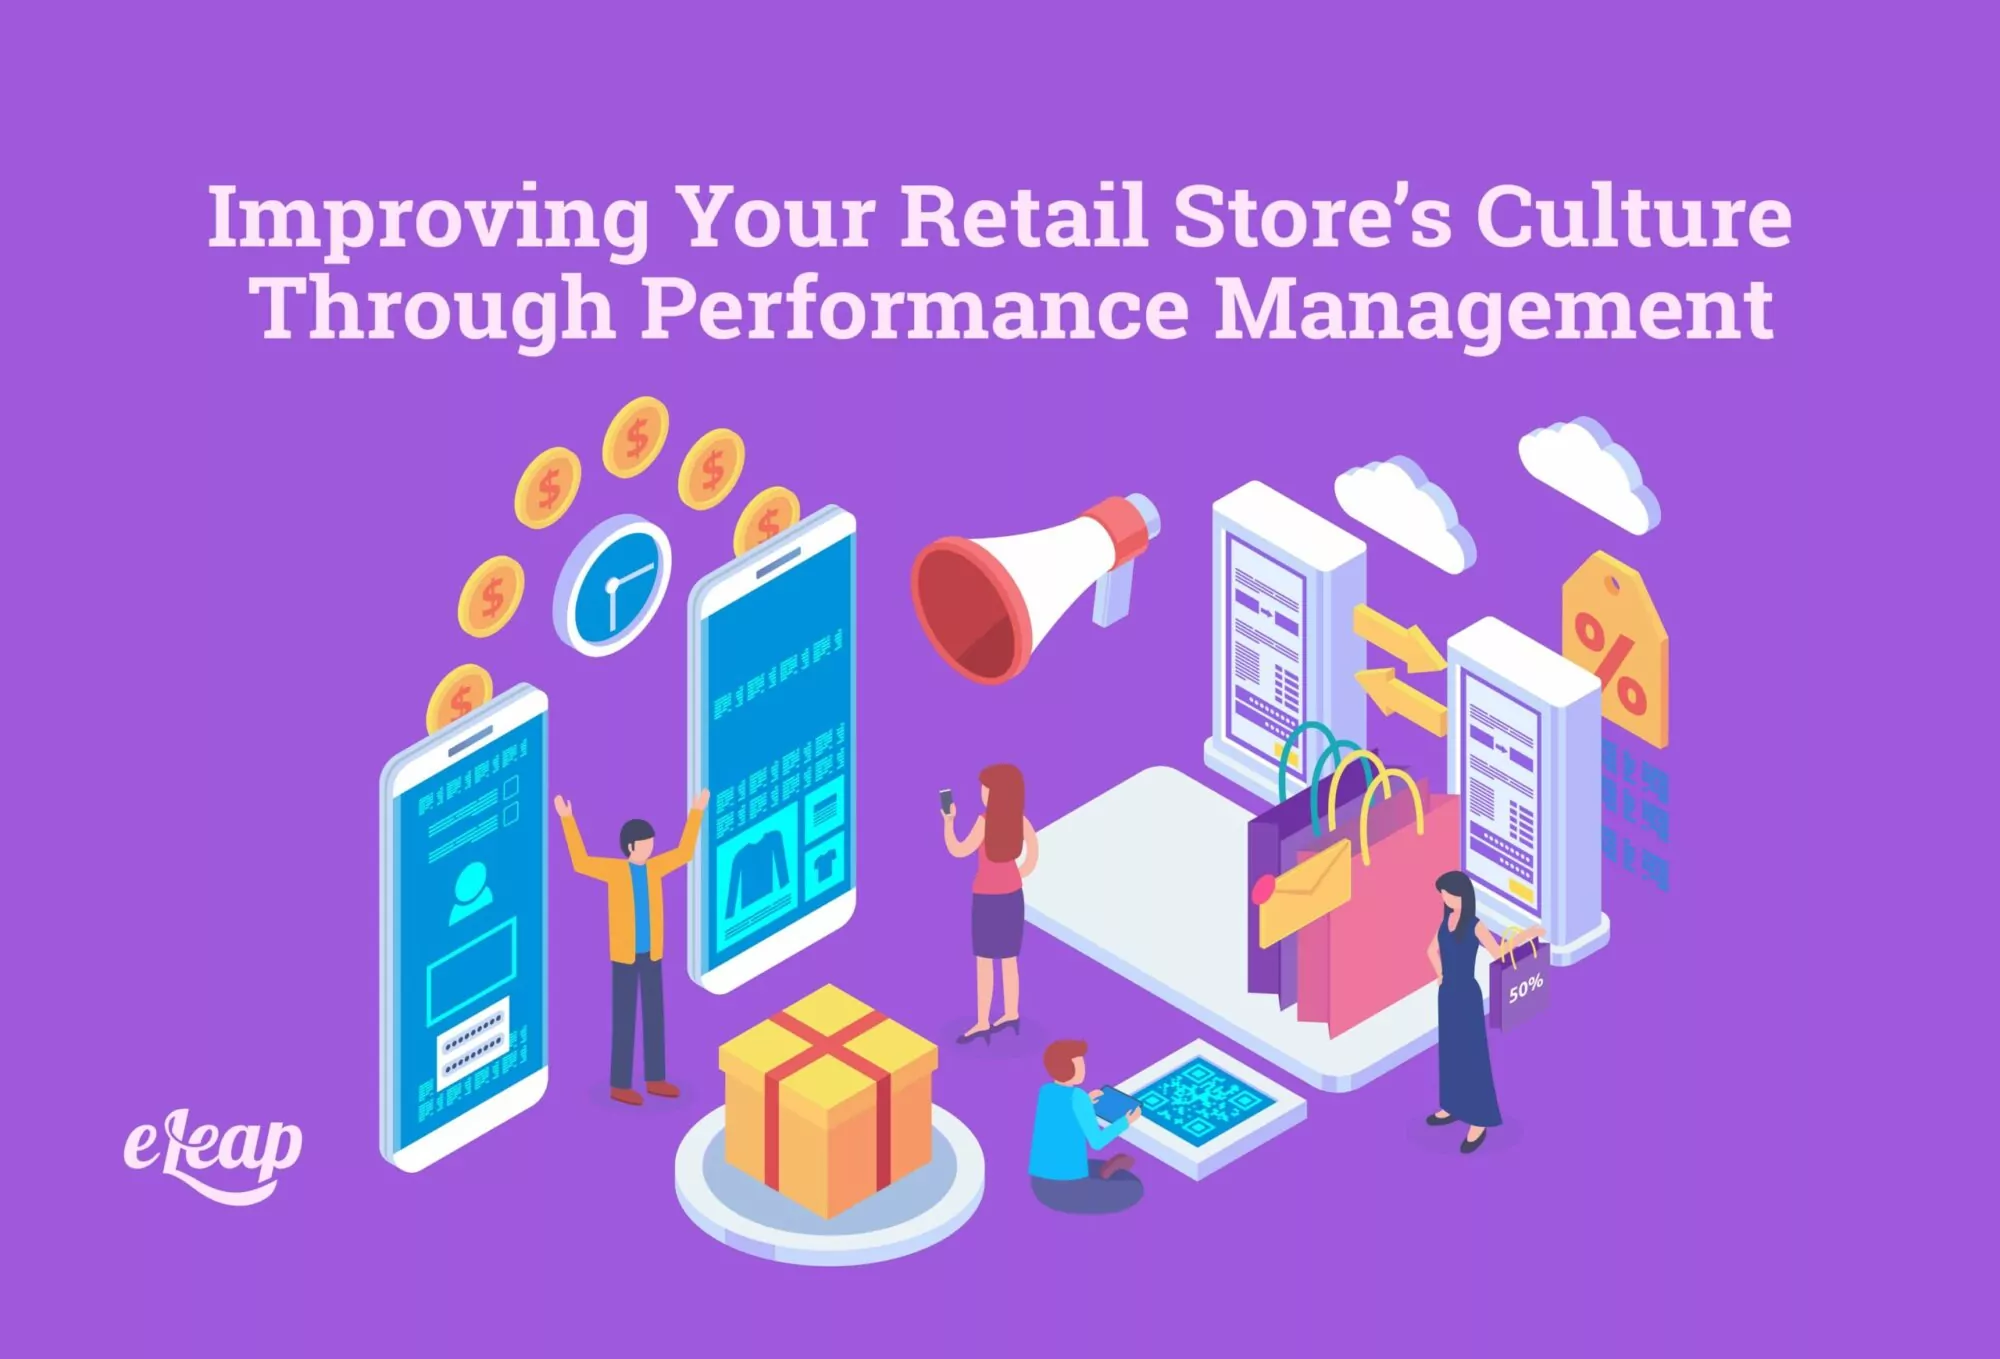 Improving Your Retail Store’s Culture Through Performance Management